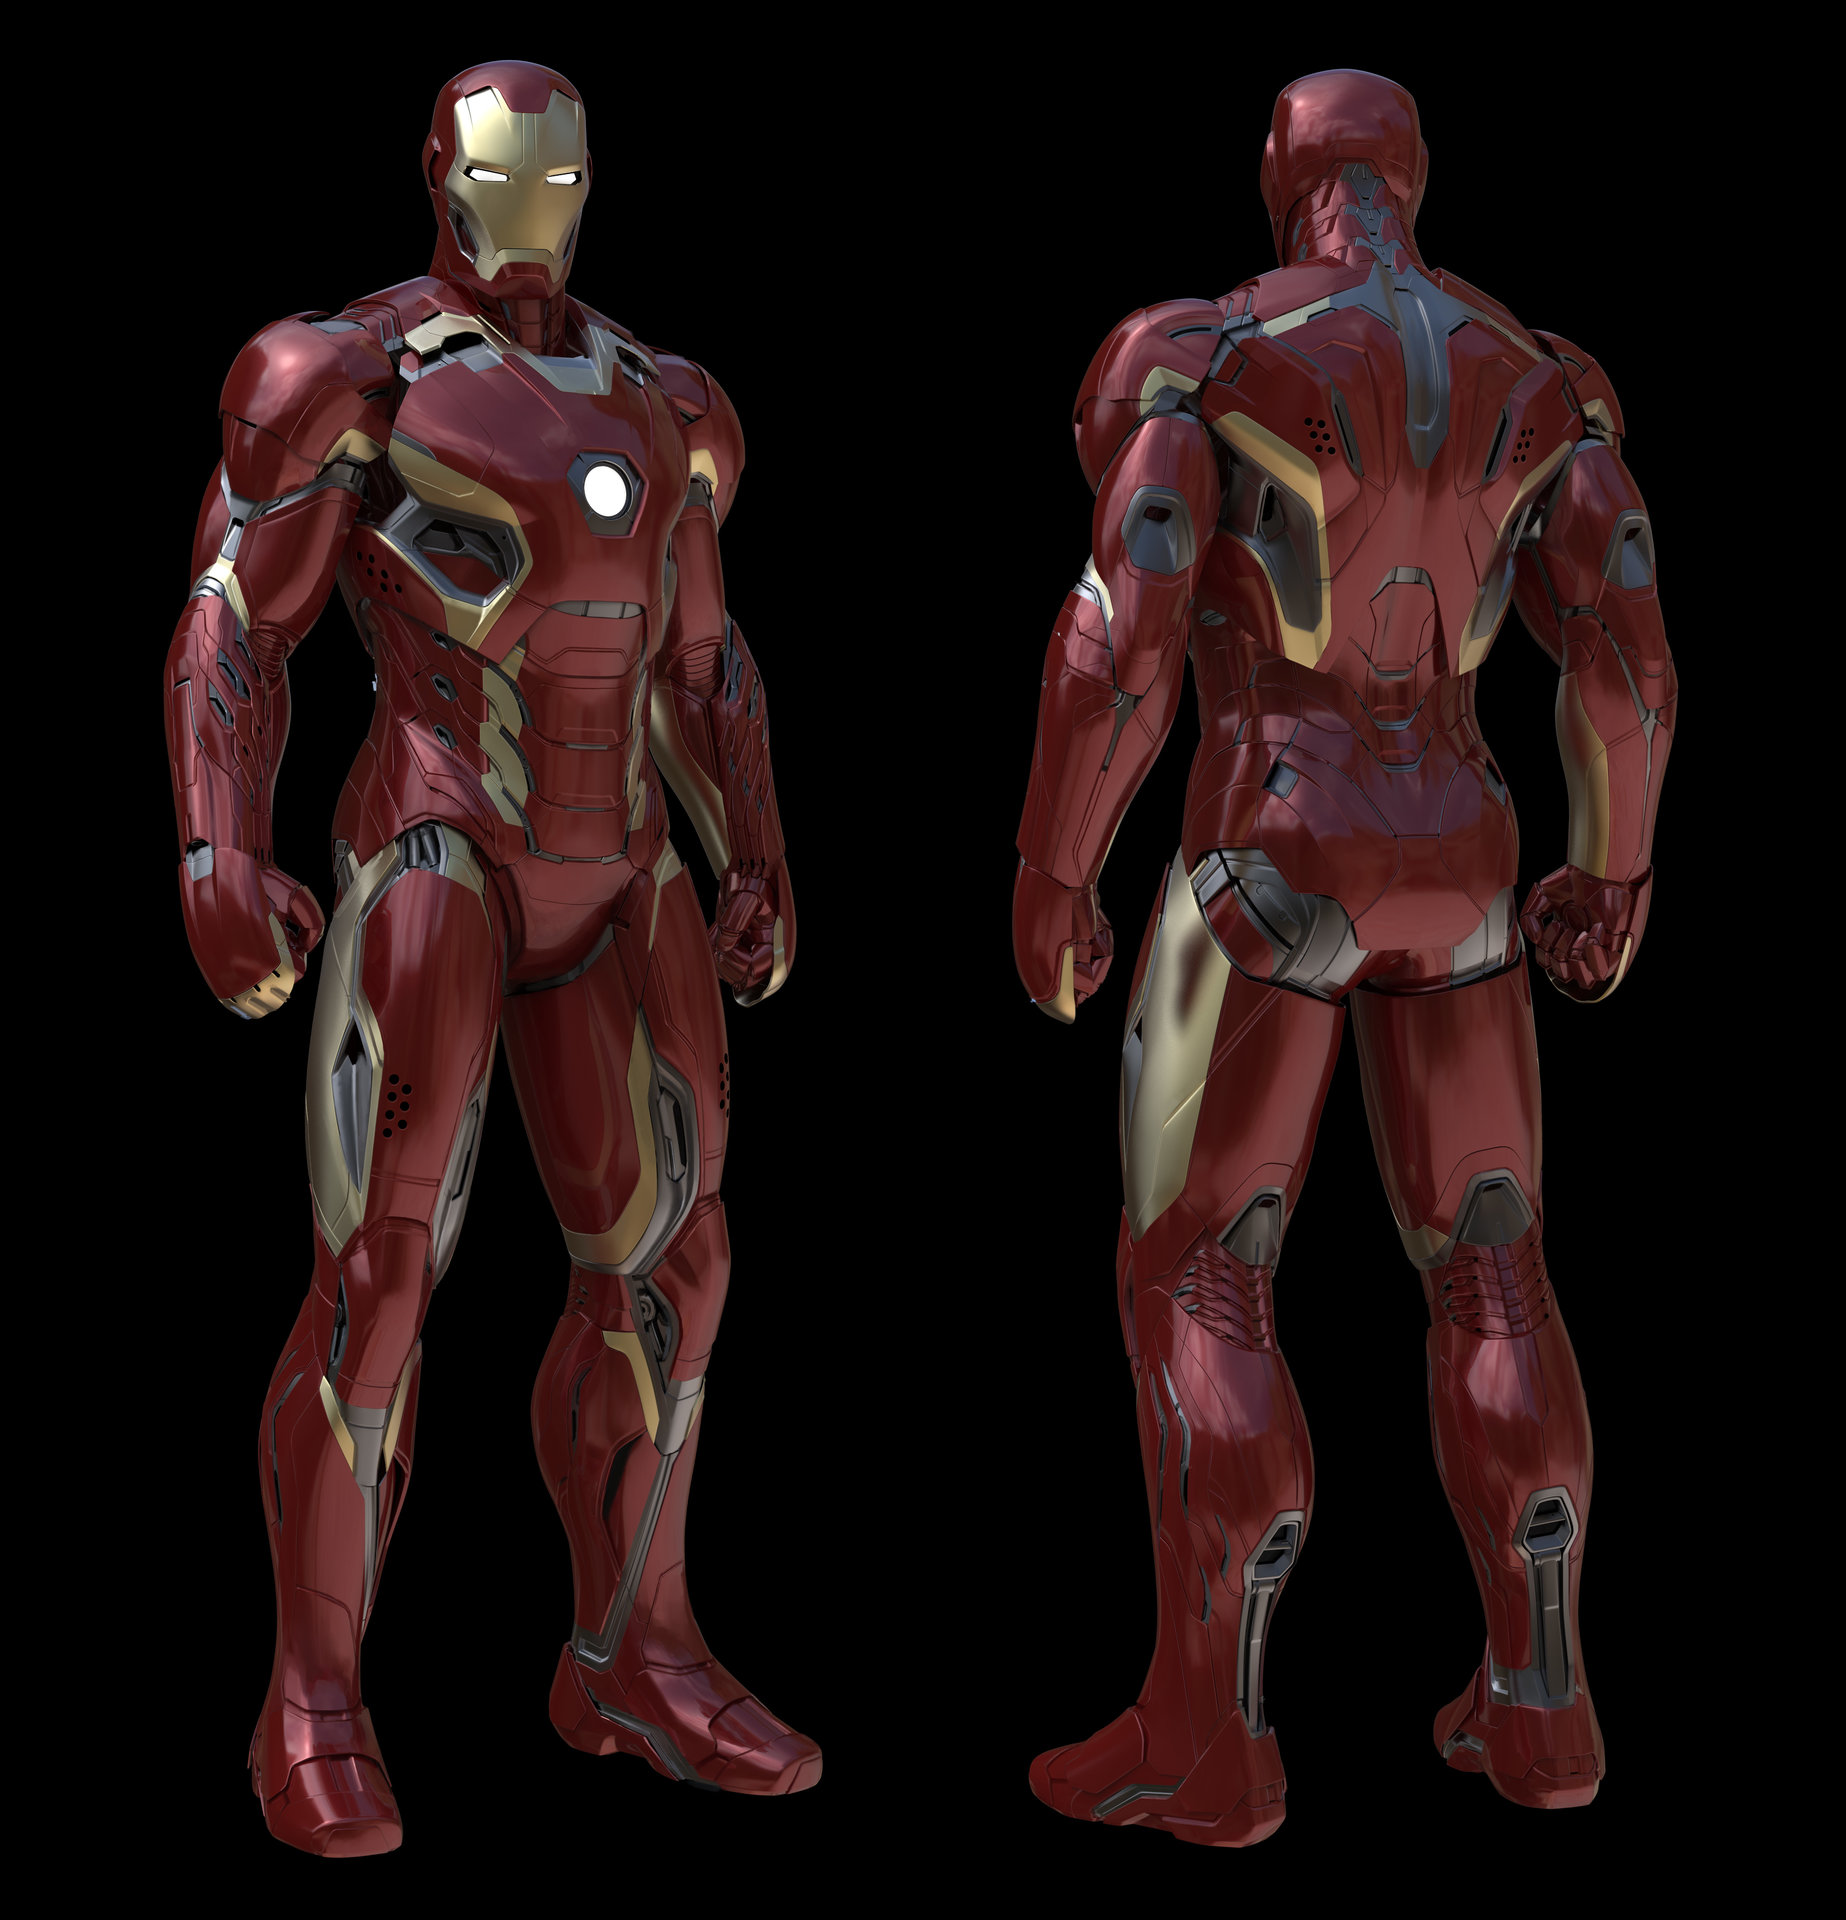 Iron Man Mark 45 3d Modeling Page 6 Rpf Costume And Prop Maker Community